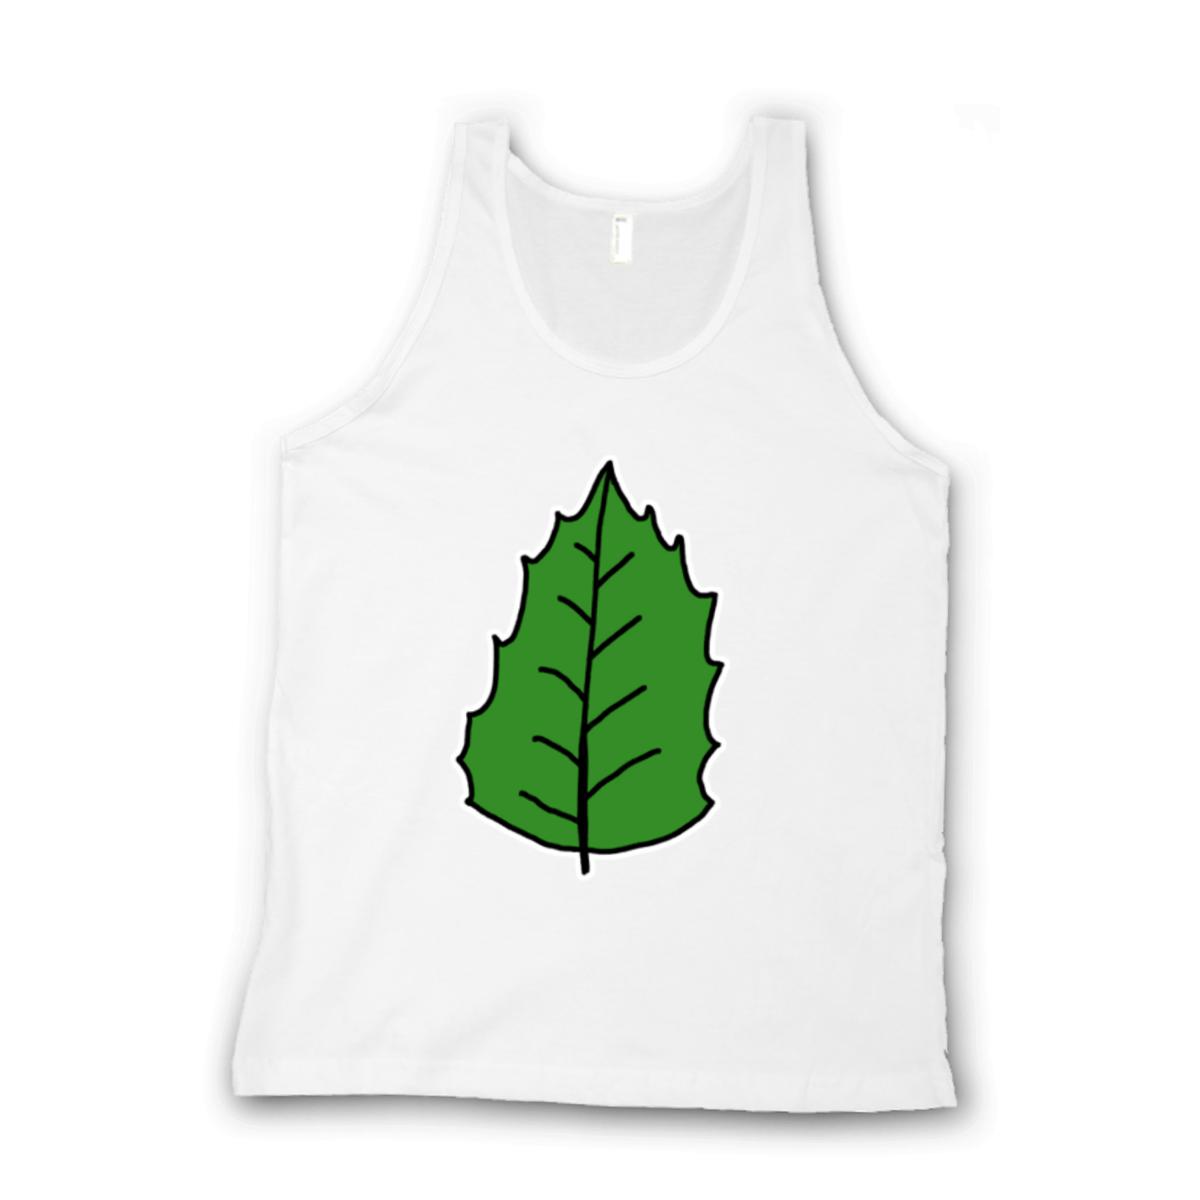 Holly Leaf Unisex Tank Top Extra Small white